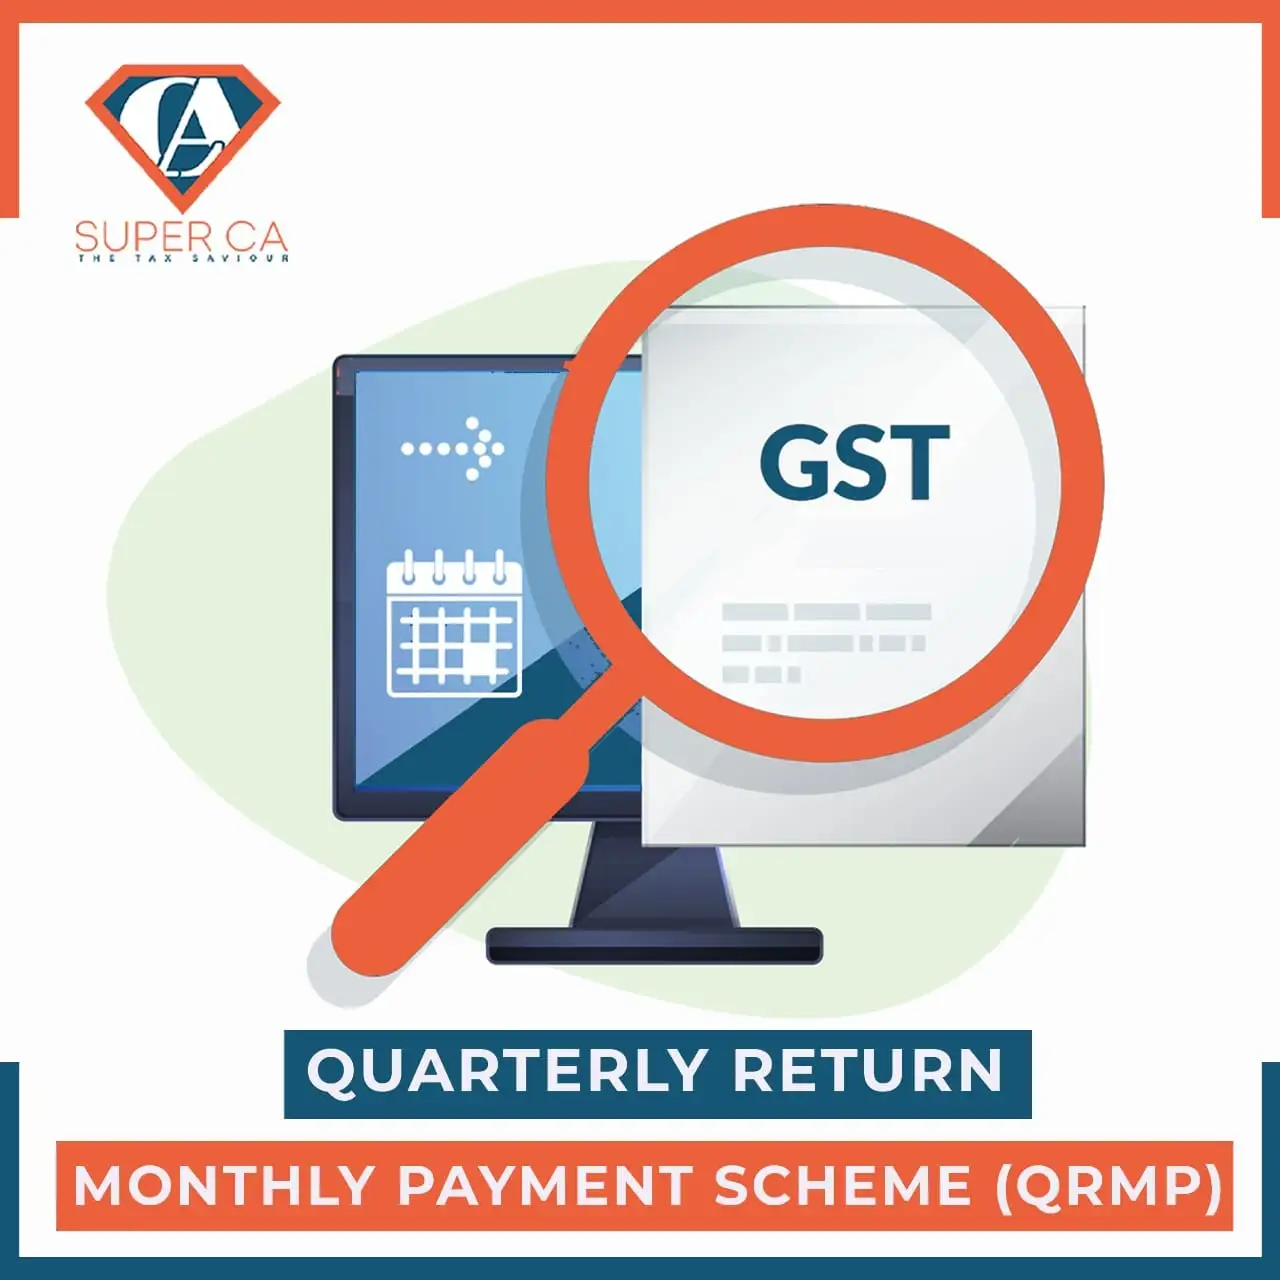 Quarterly Return and Monthly Payment (QRMP) Scheme.